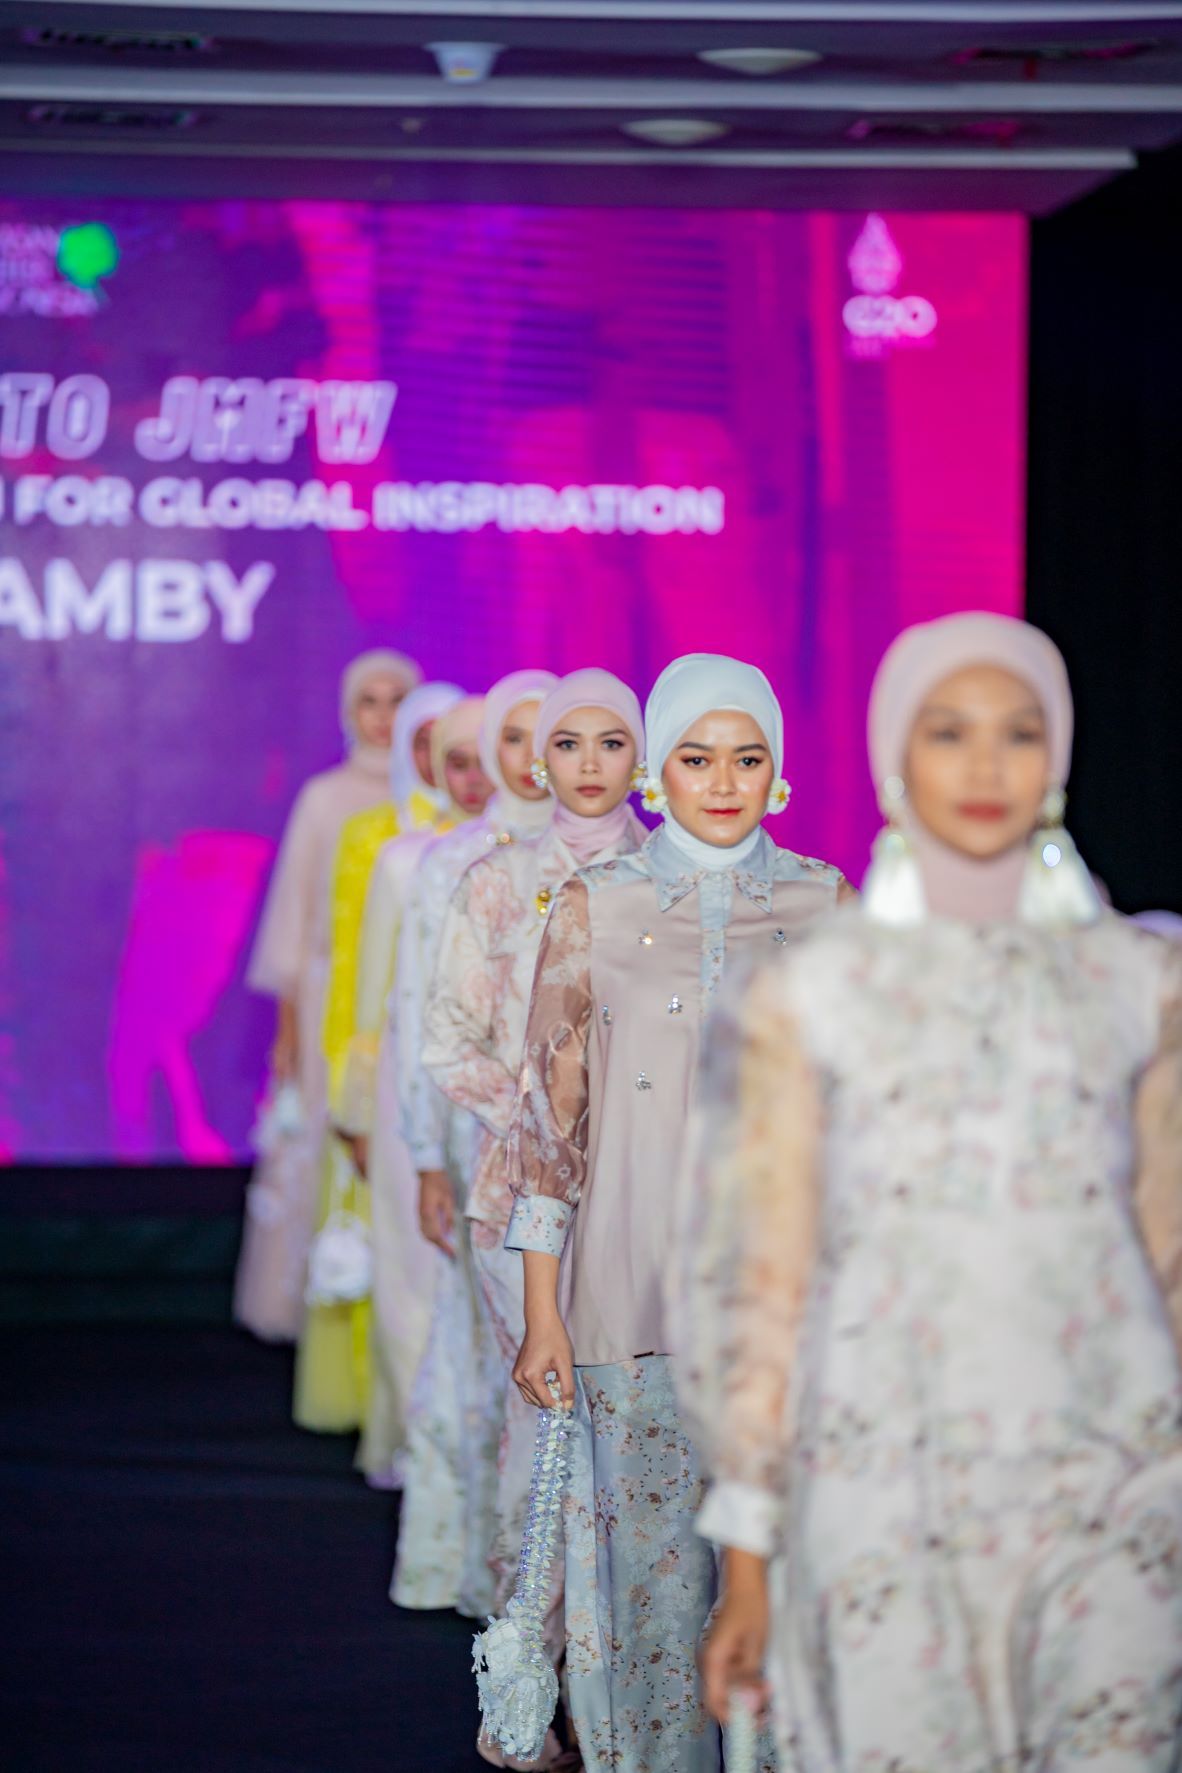 8 Sign Out for the Road to Jakarta Muslim Fashion Week 2023